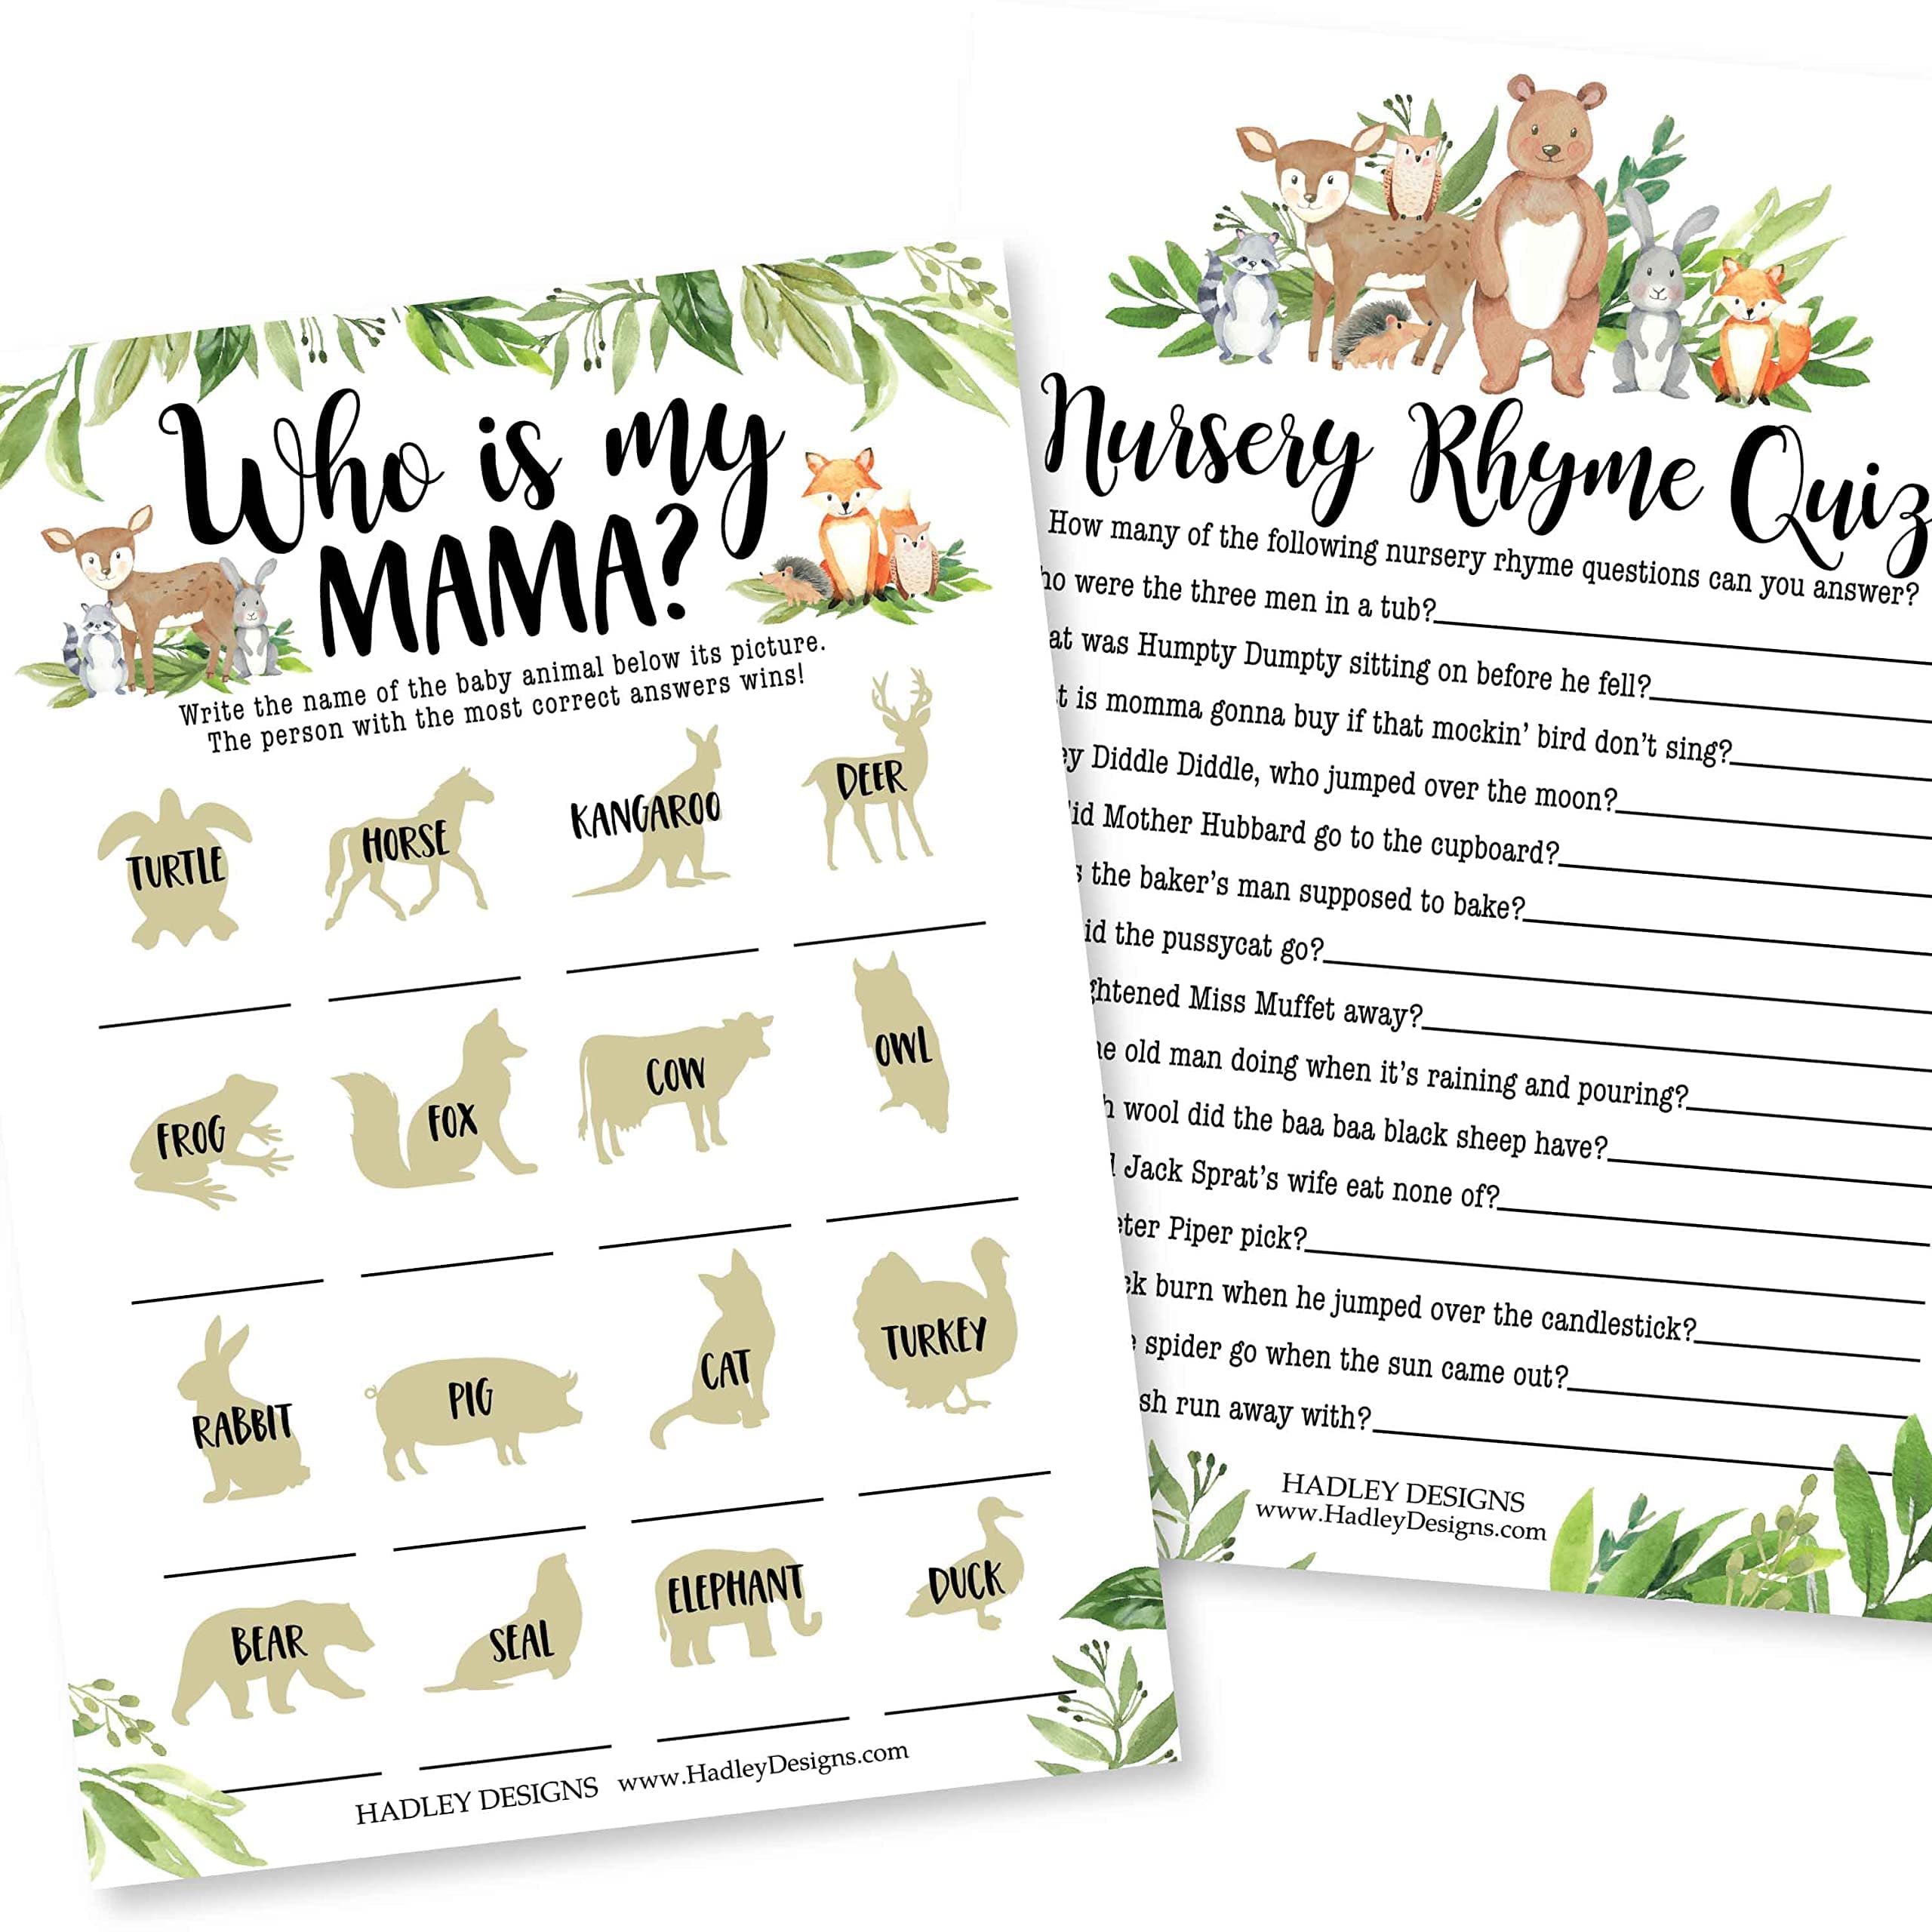 25 Woodland Animal Matching, 25 Nursery Rhyme Game, 25 Who Knows Mommy Best, 25 Baby Prediction And Advice Cards - 4 Double Sided Cards, Baby Shower Party Supplies